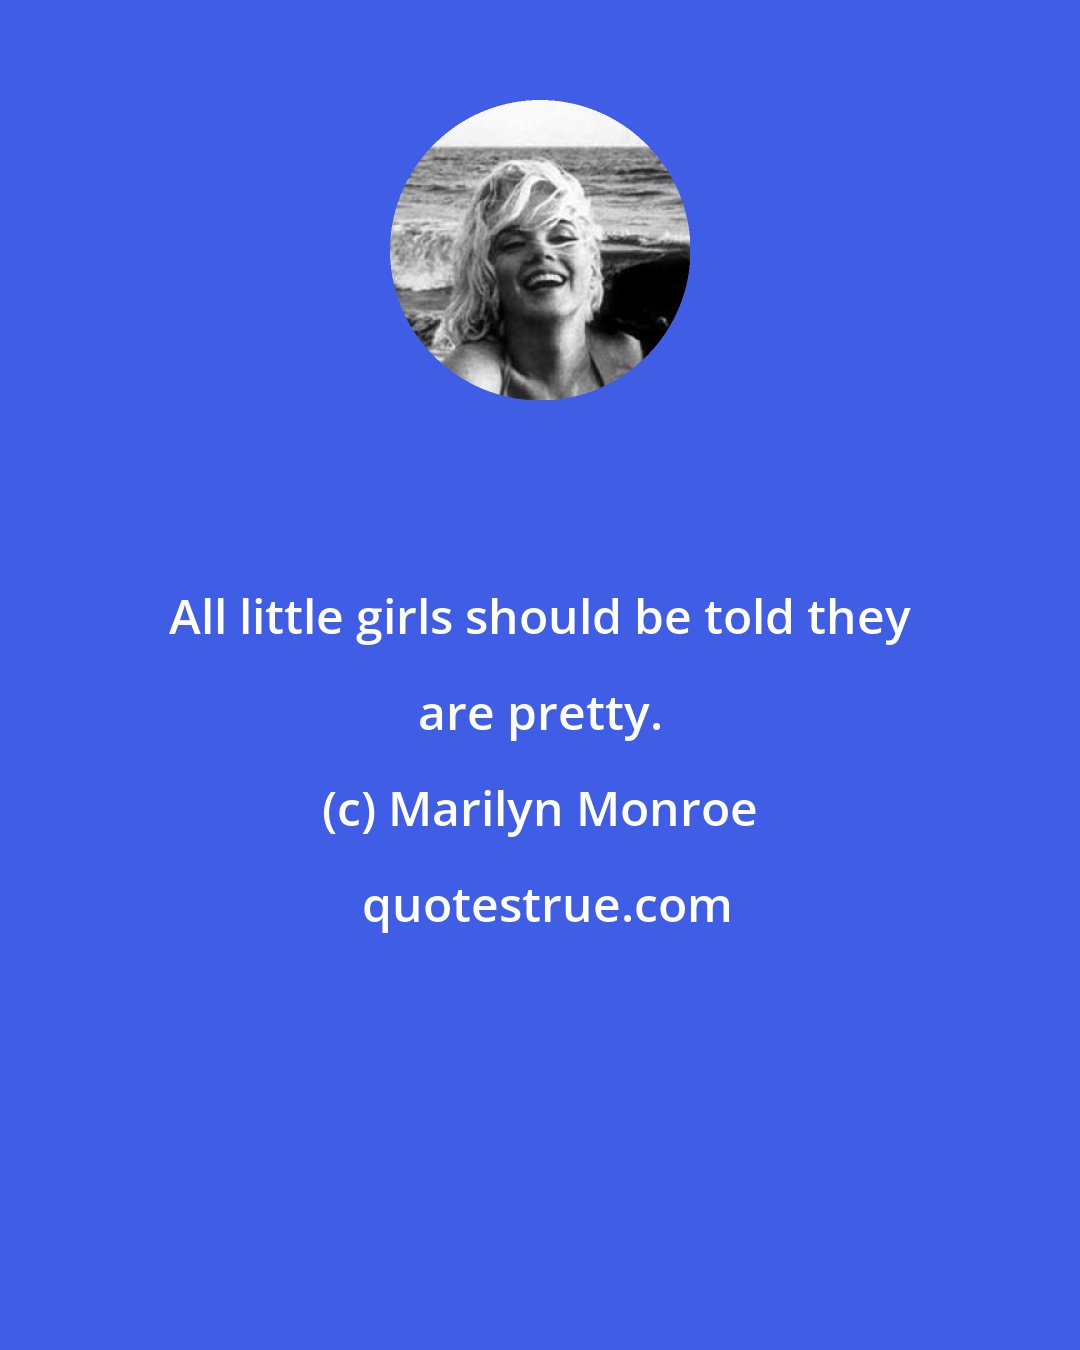 Marilyn Monroe: All little girls should be told they are pretty.